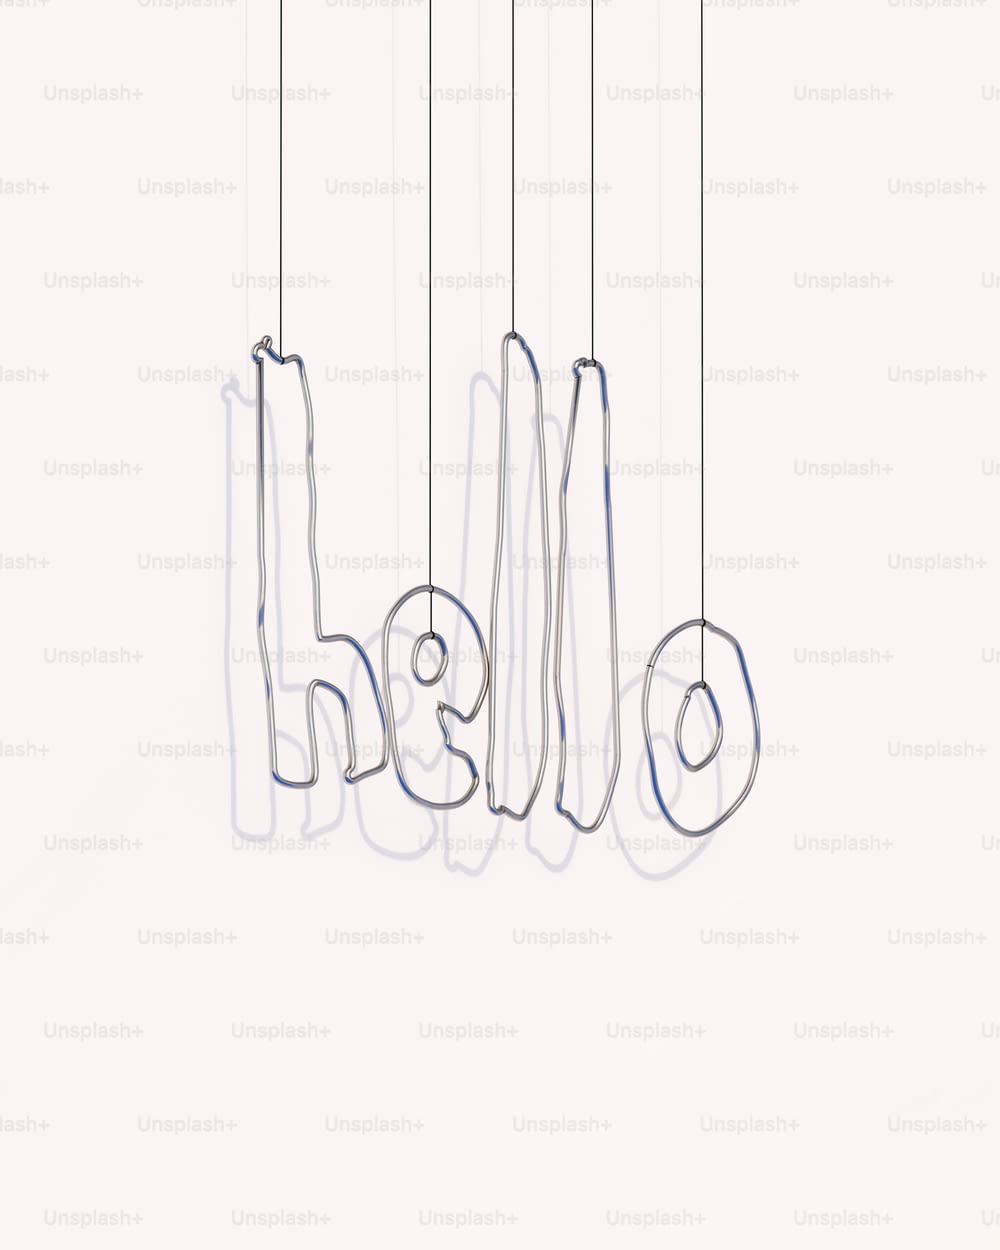 a drawing of a group of letters hanging from strings